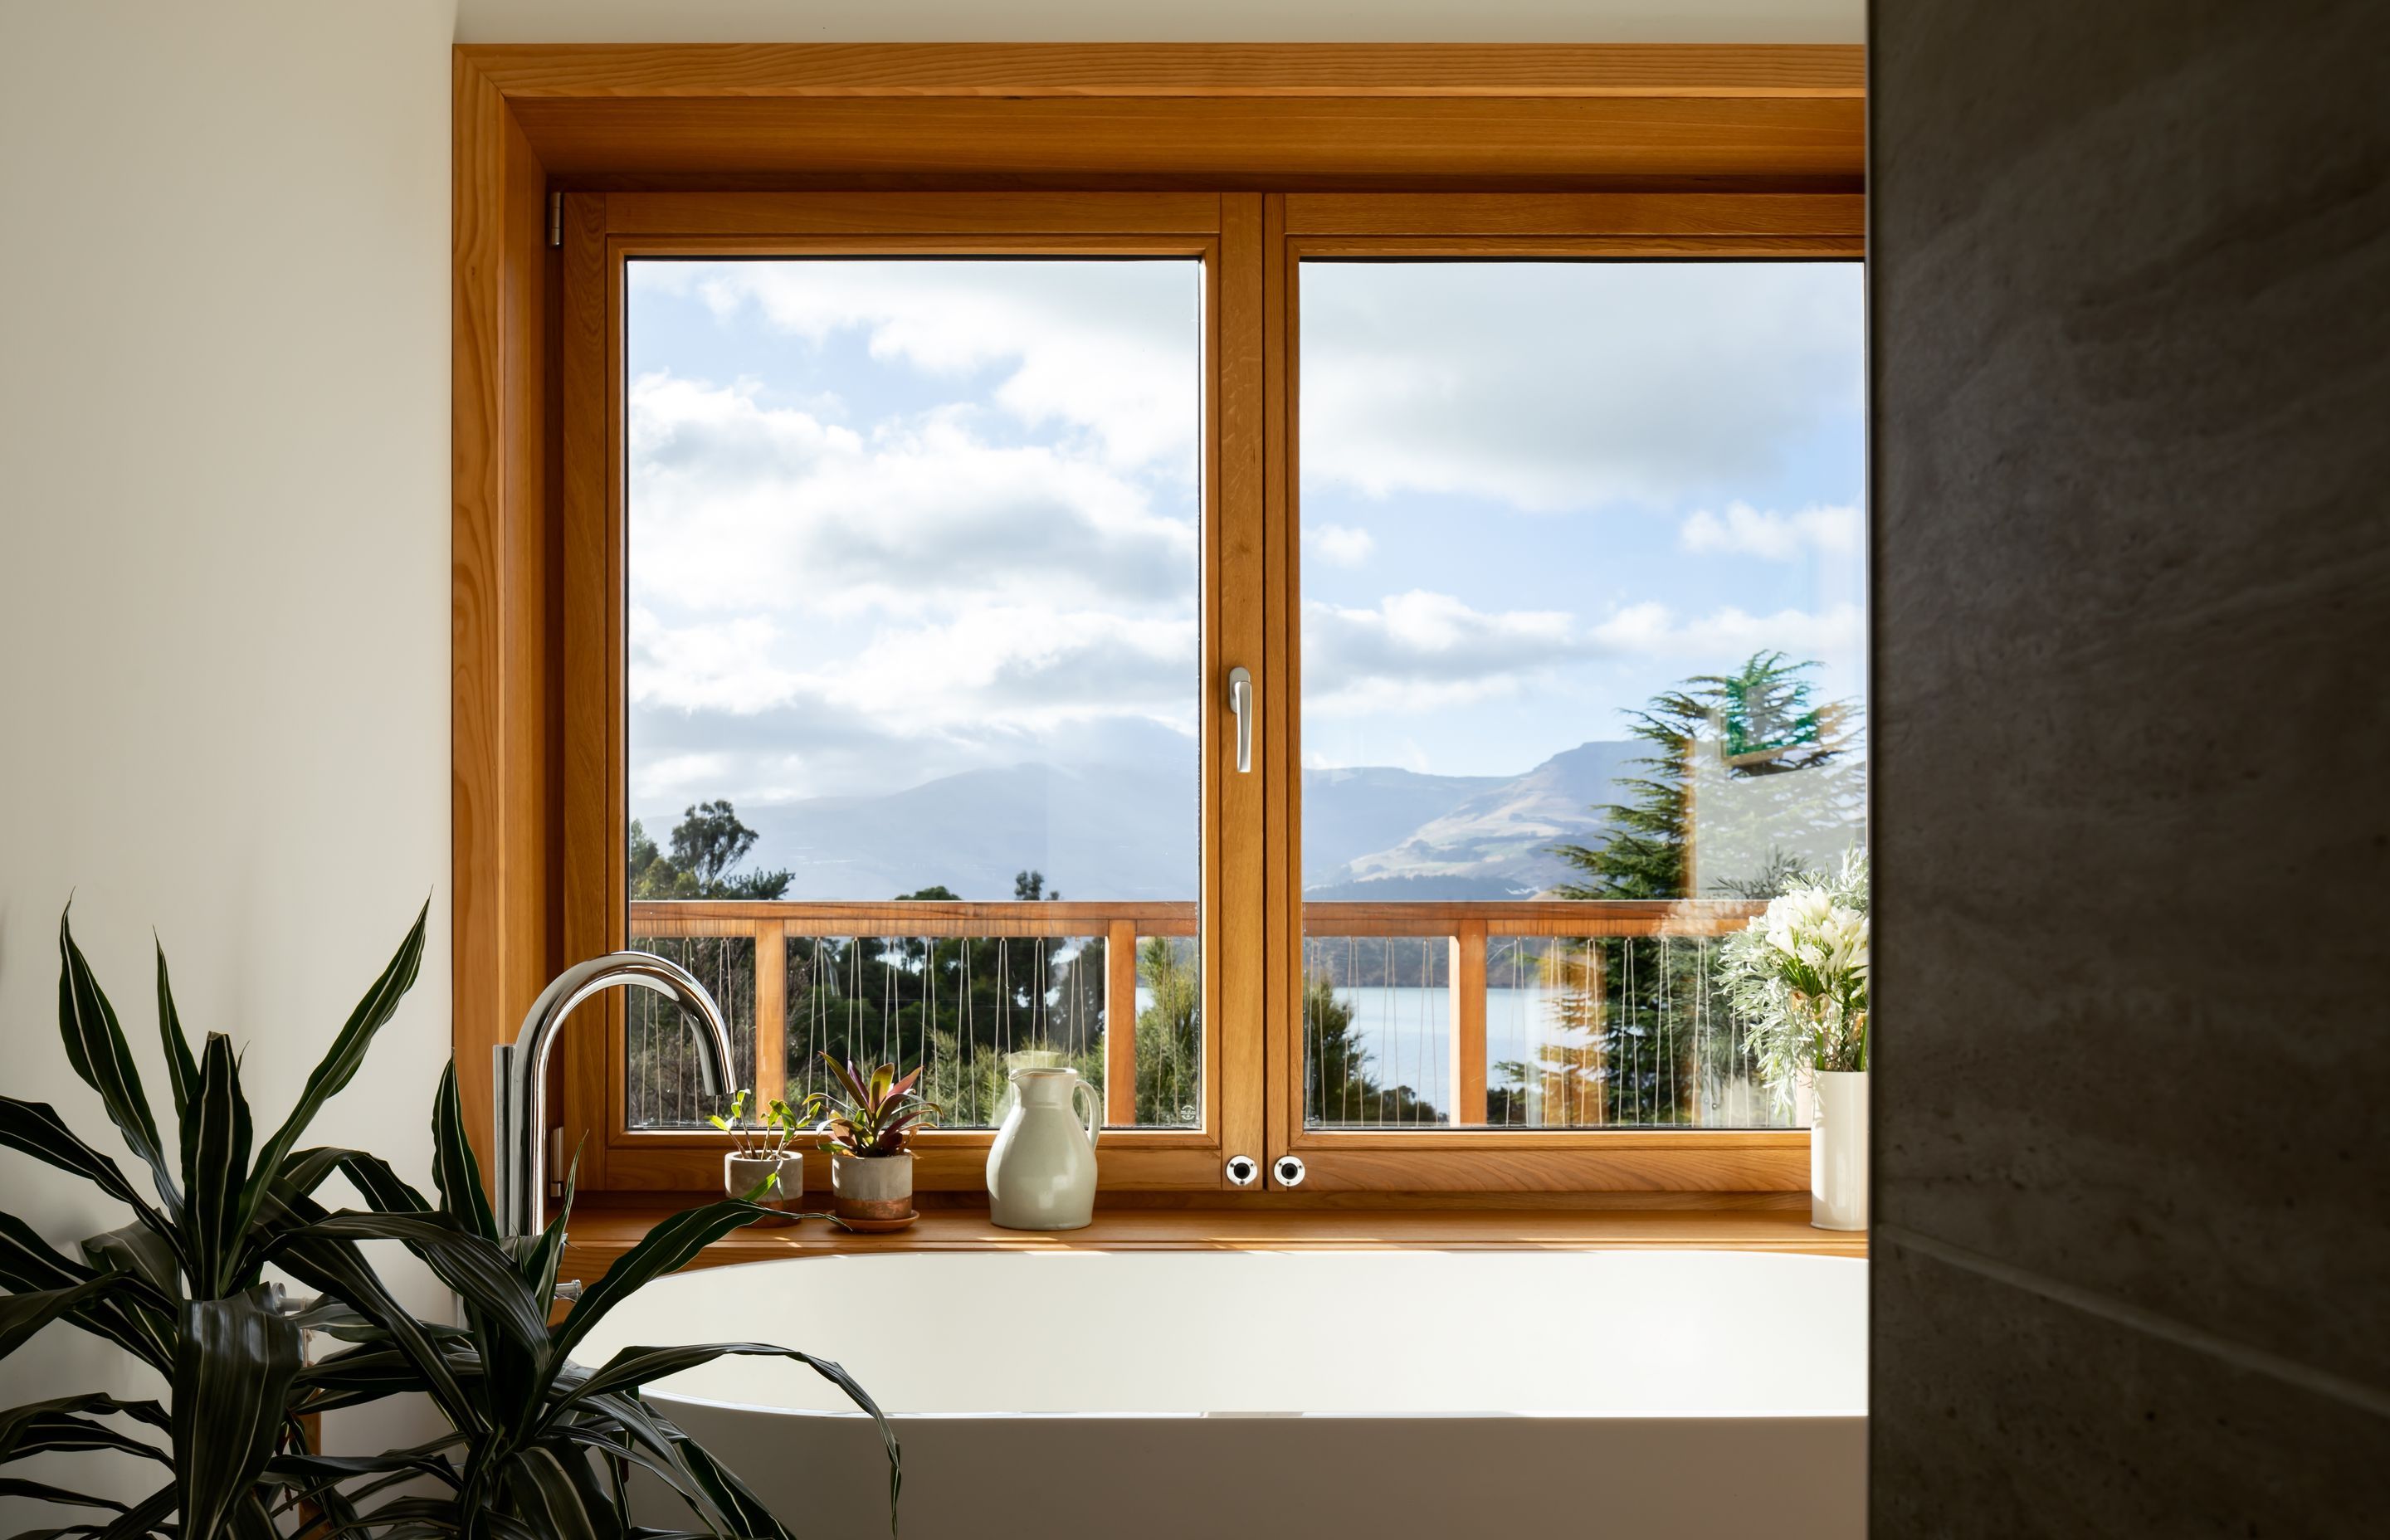 The timber window frames pop out of the house to create deep sills above a bathtub, highlighting the sensational view over Governors Bay.